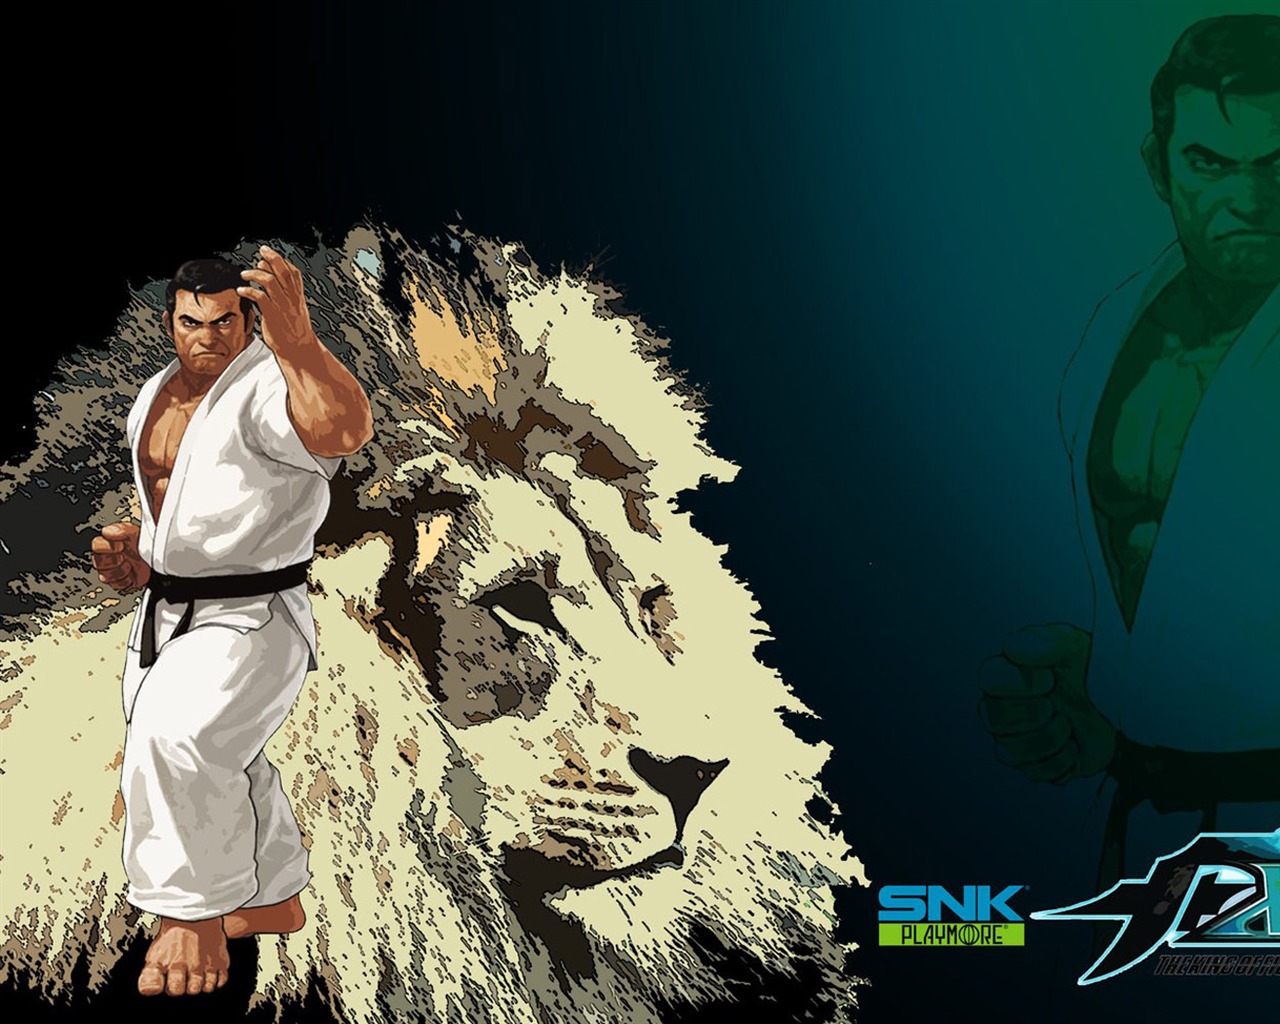 The King of Fighters XIII wallpapers #3 - 1280x1024